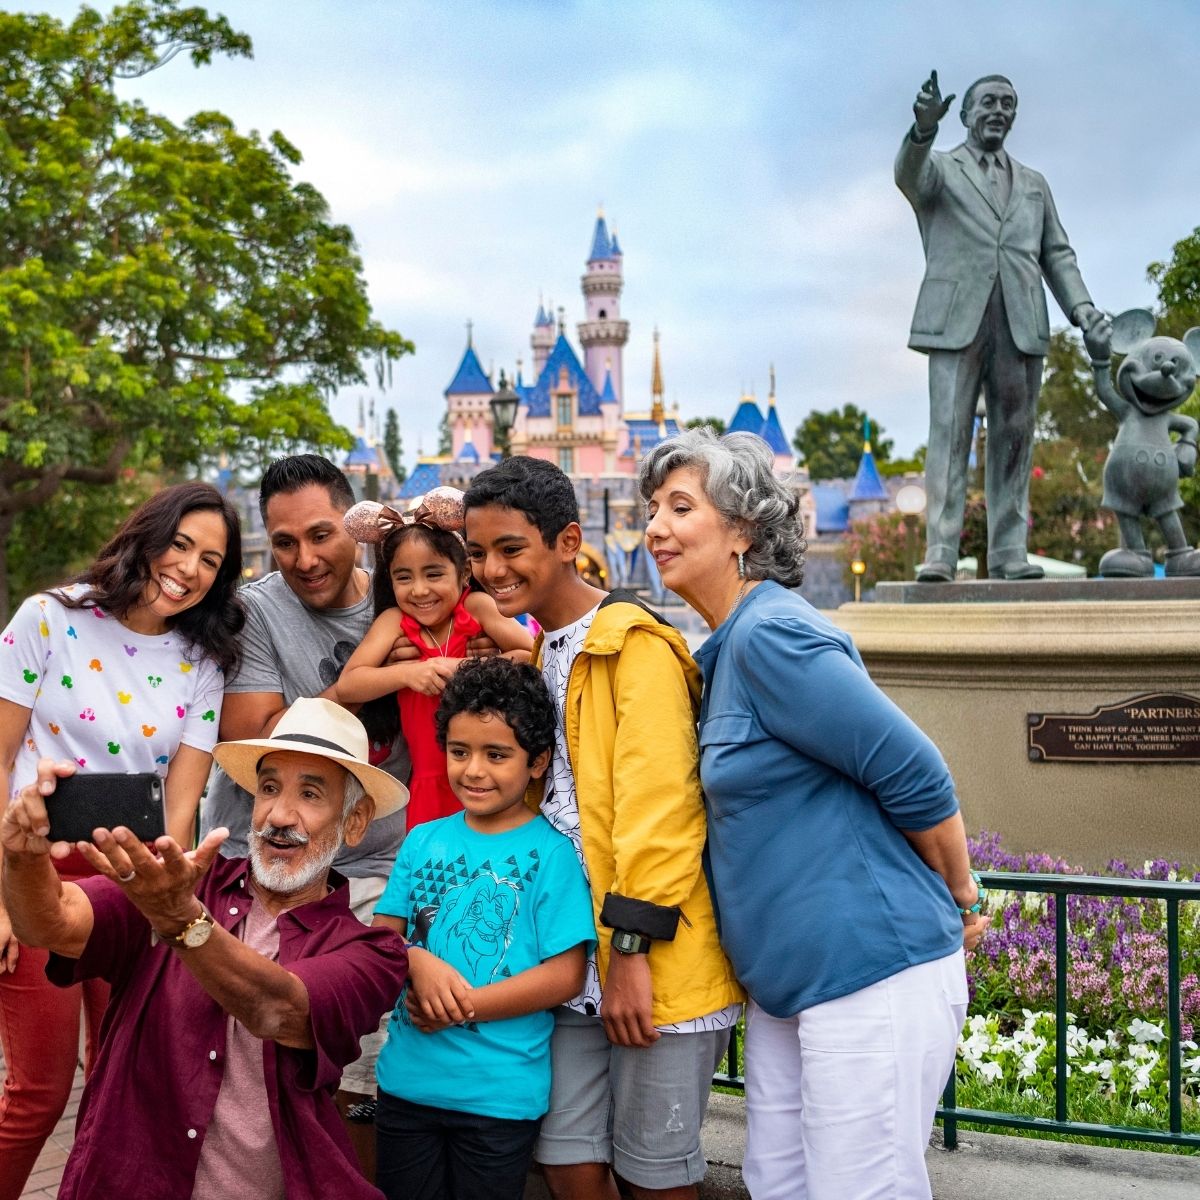 family taking a picture in front of the partner statue at Disneyland